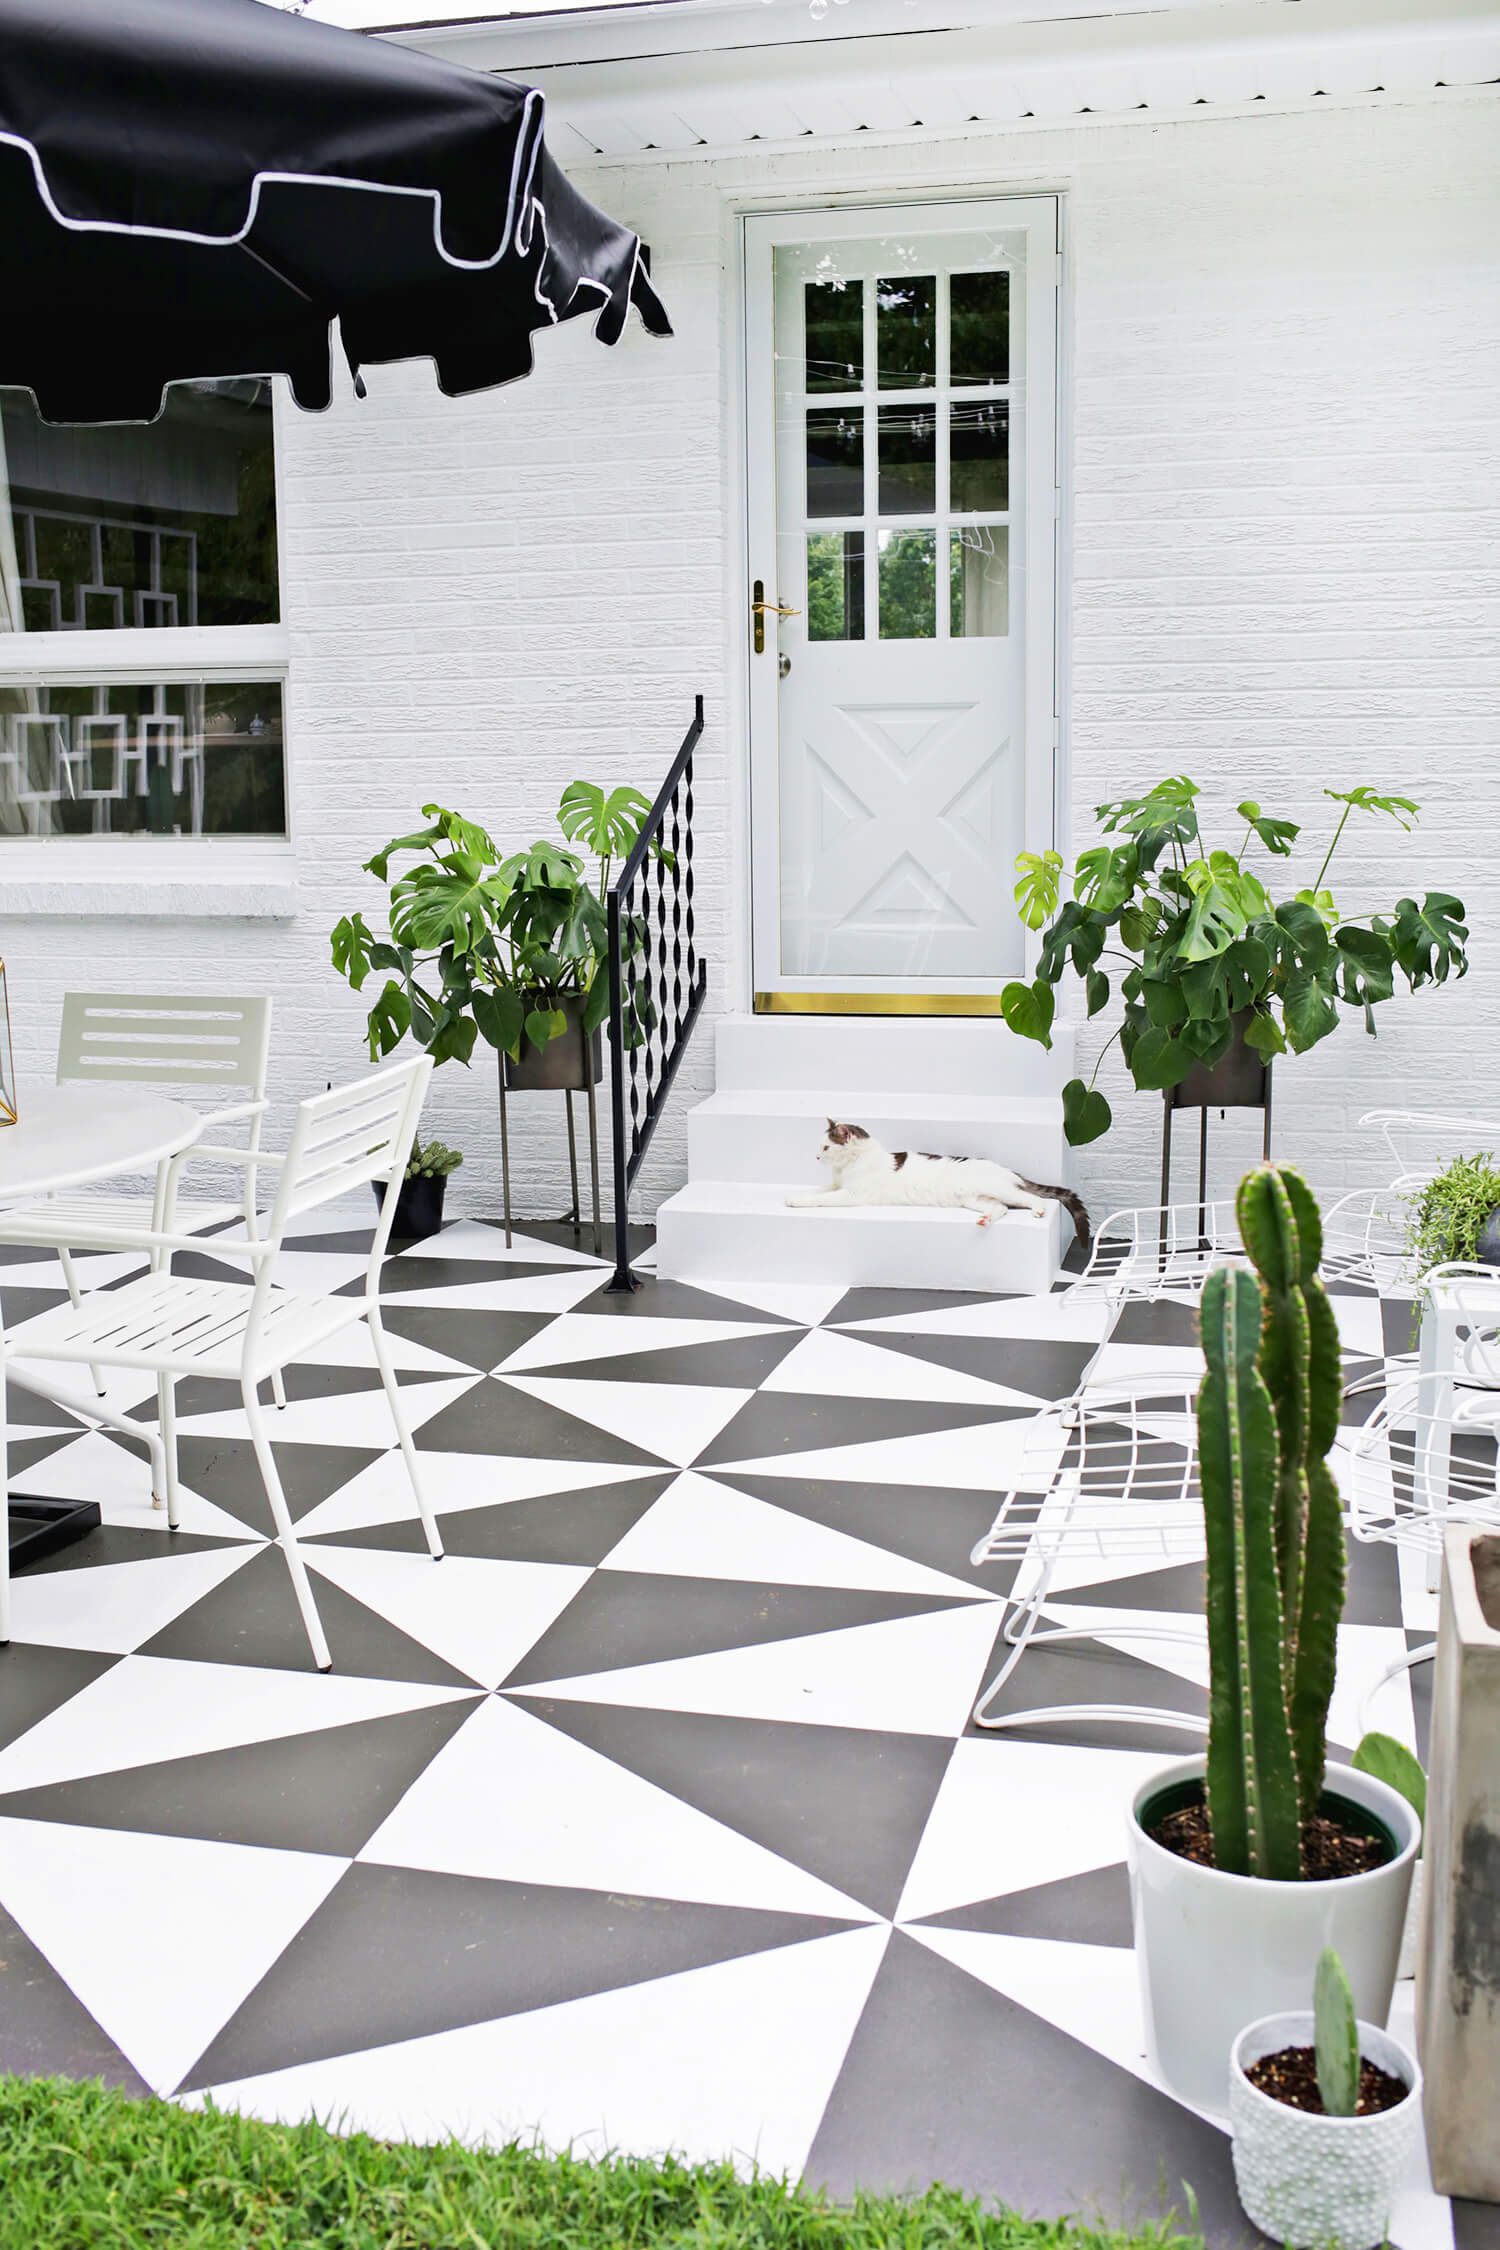 16 Wonderful DIY Projects For Your Patio You Must Make This Summer